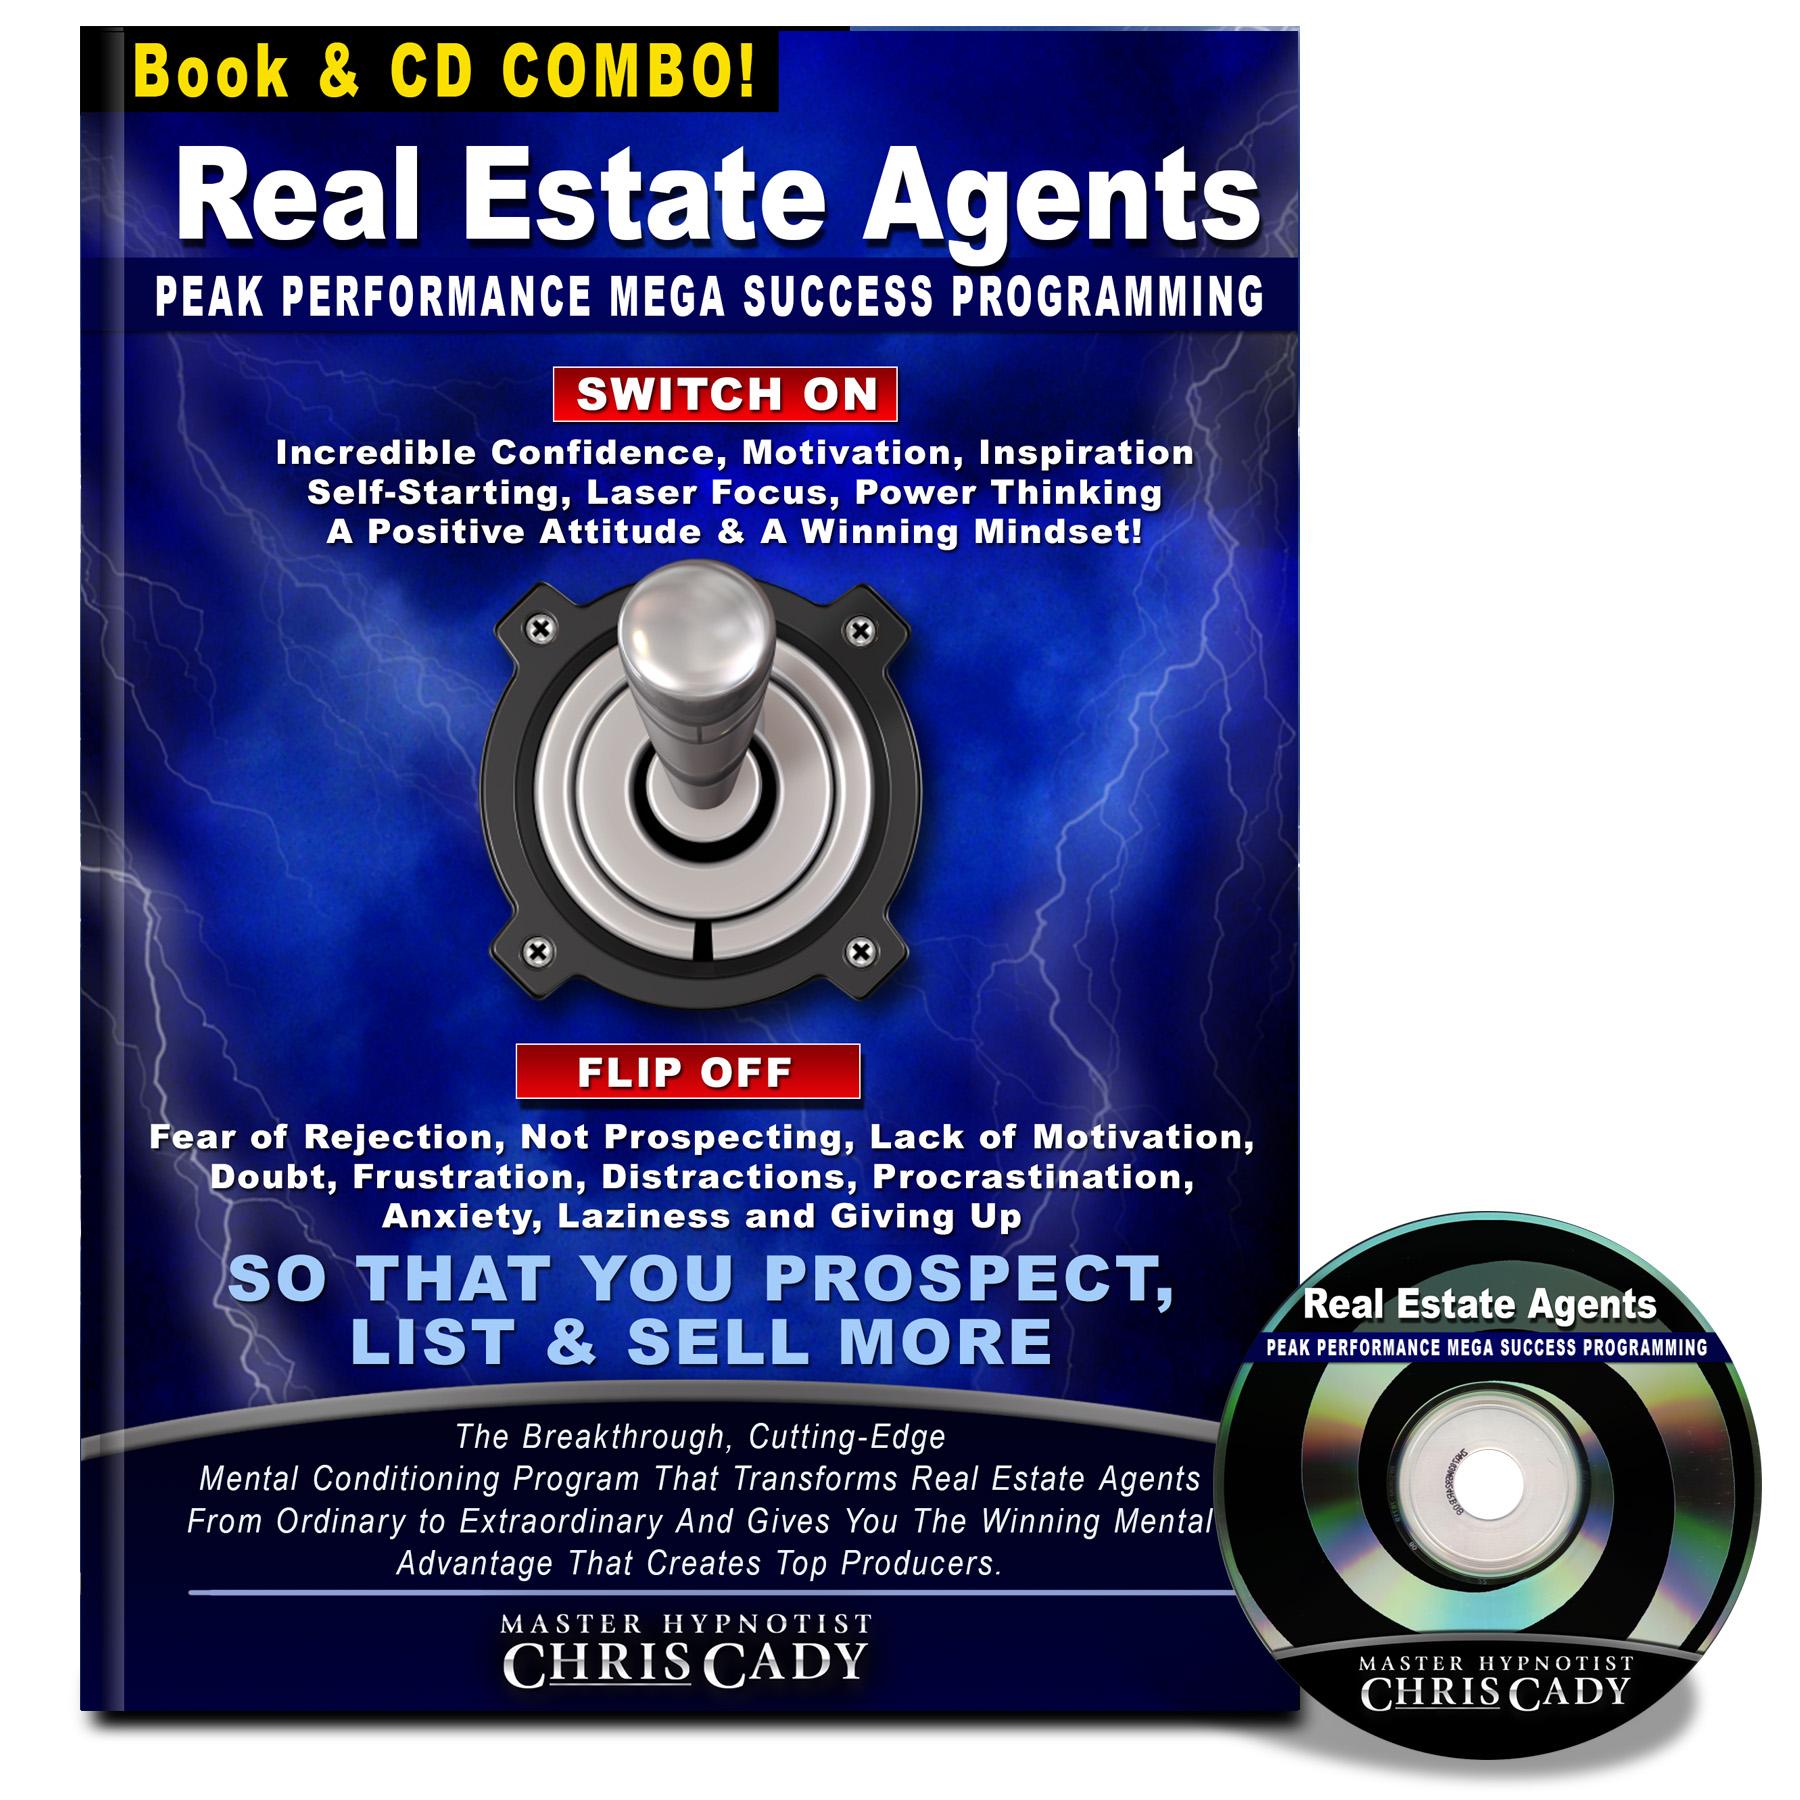 hypnosis for real estate agents self confidence success hypnosis cd and book cover